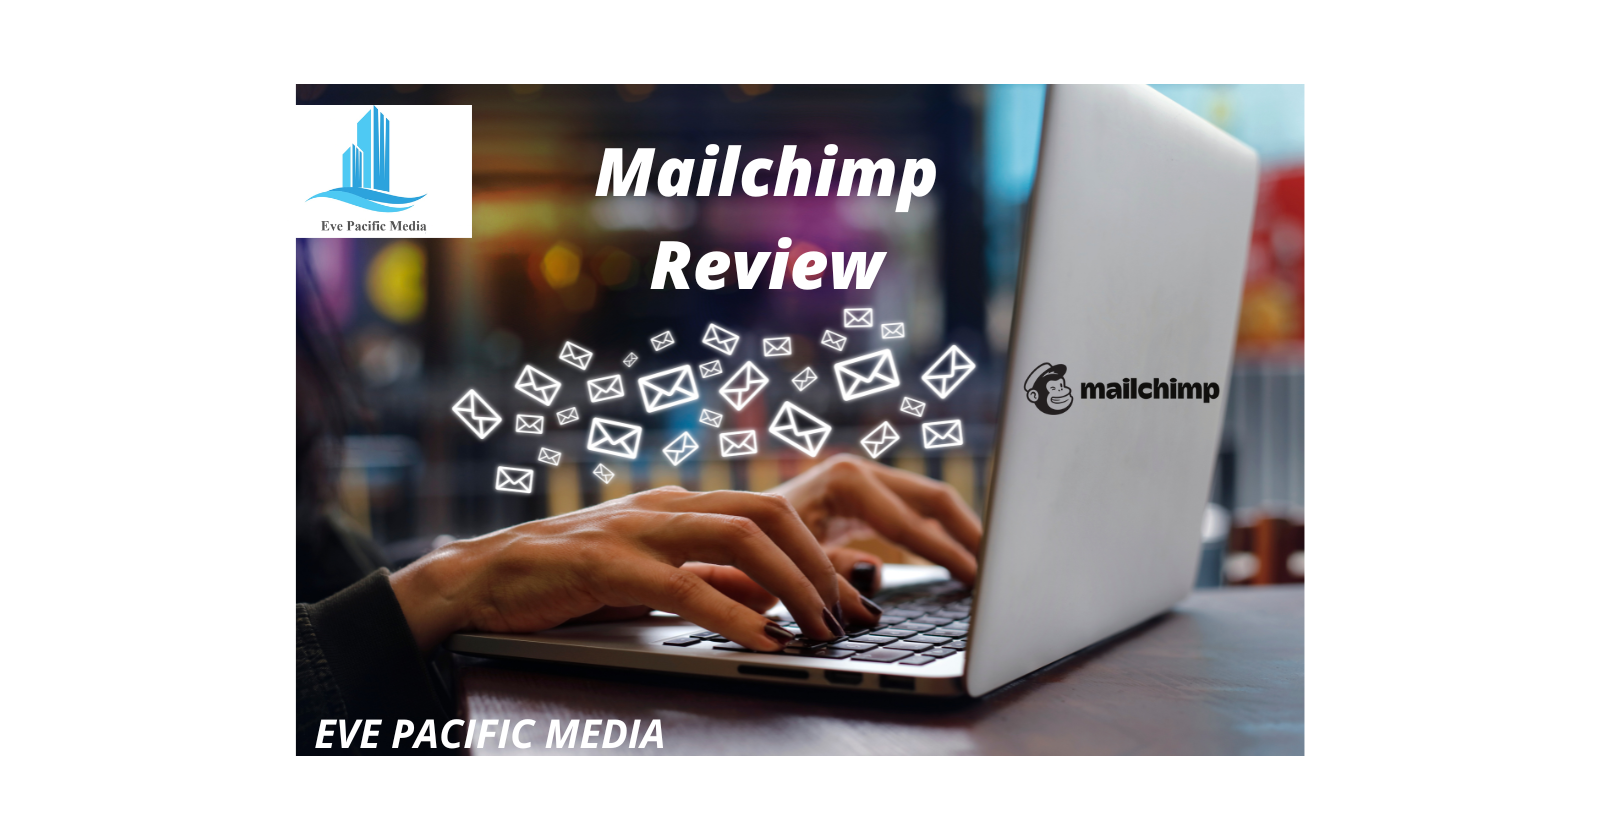 Mailchimp Review: Everything You Need to know about Mailchimp